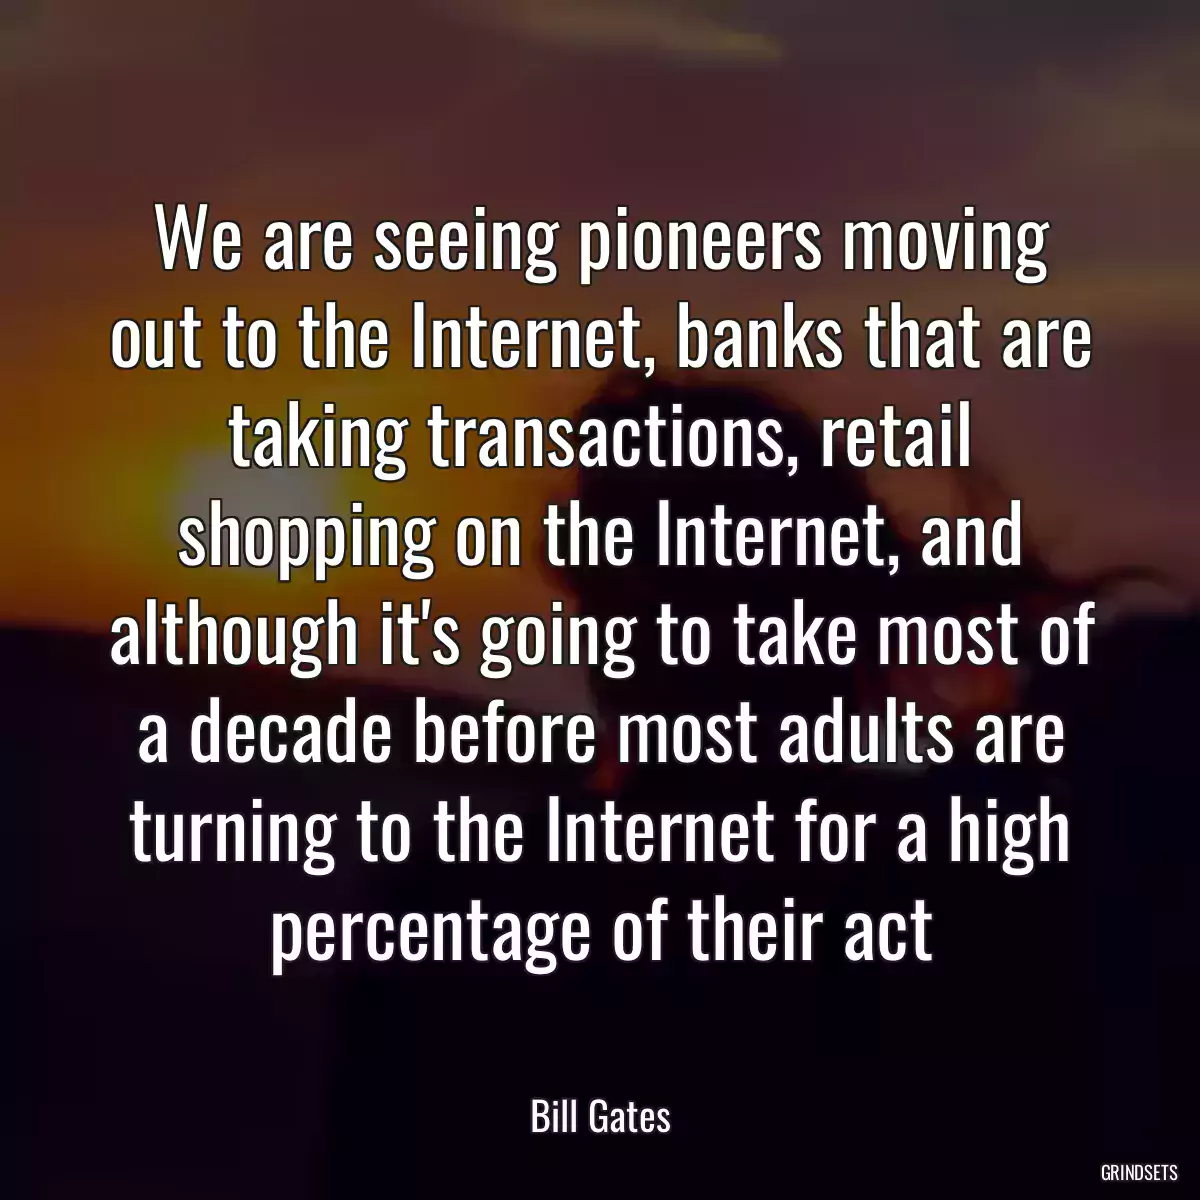 We are seeing pioneers moving out to the Internet, banks that are taking transactions, retail shopping on the Internet, and although it\'s going to take most of a decade before most adults are turning to the Internet for a high percentage of their act